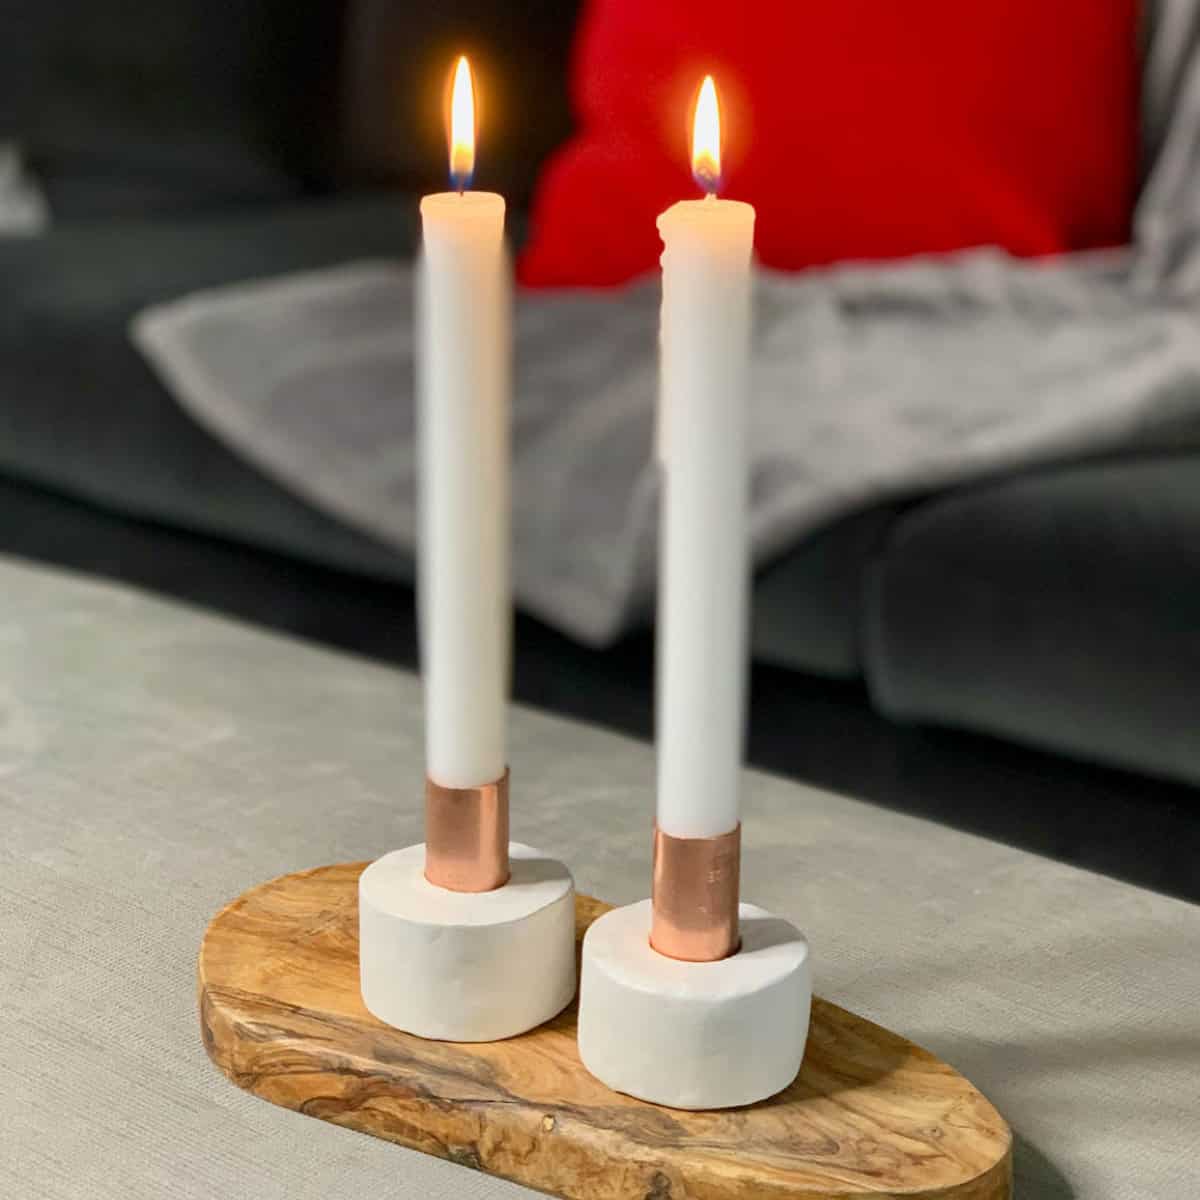 DIY Clay Candlestick Holders With Copper